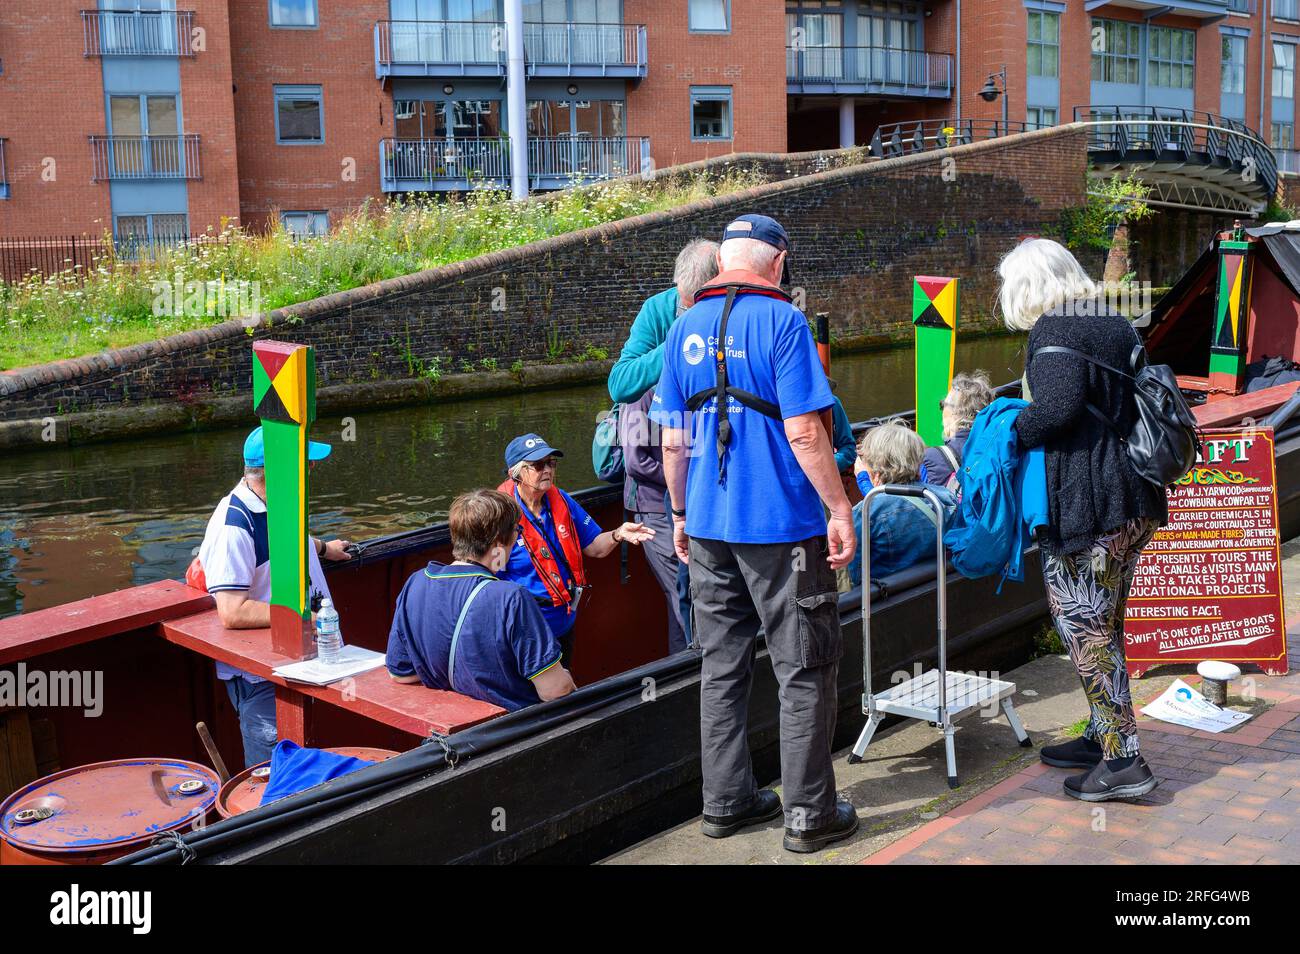 Passengers taking a trip aboard a traditional working narrowboat on a canal in Birmingham Stock Photo